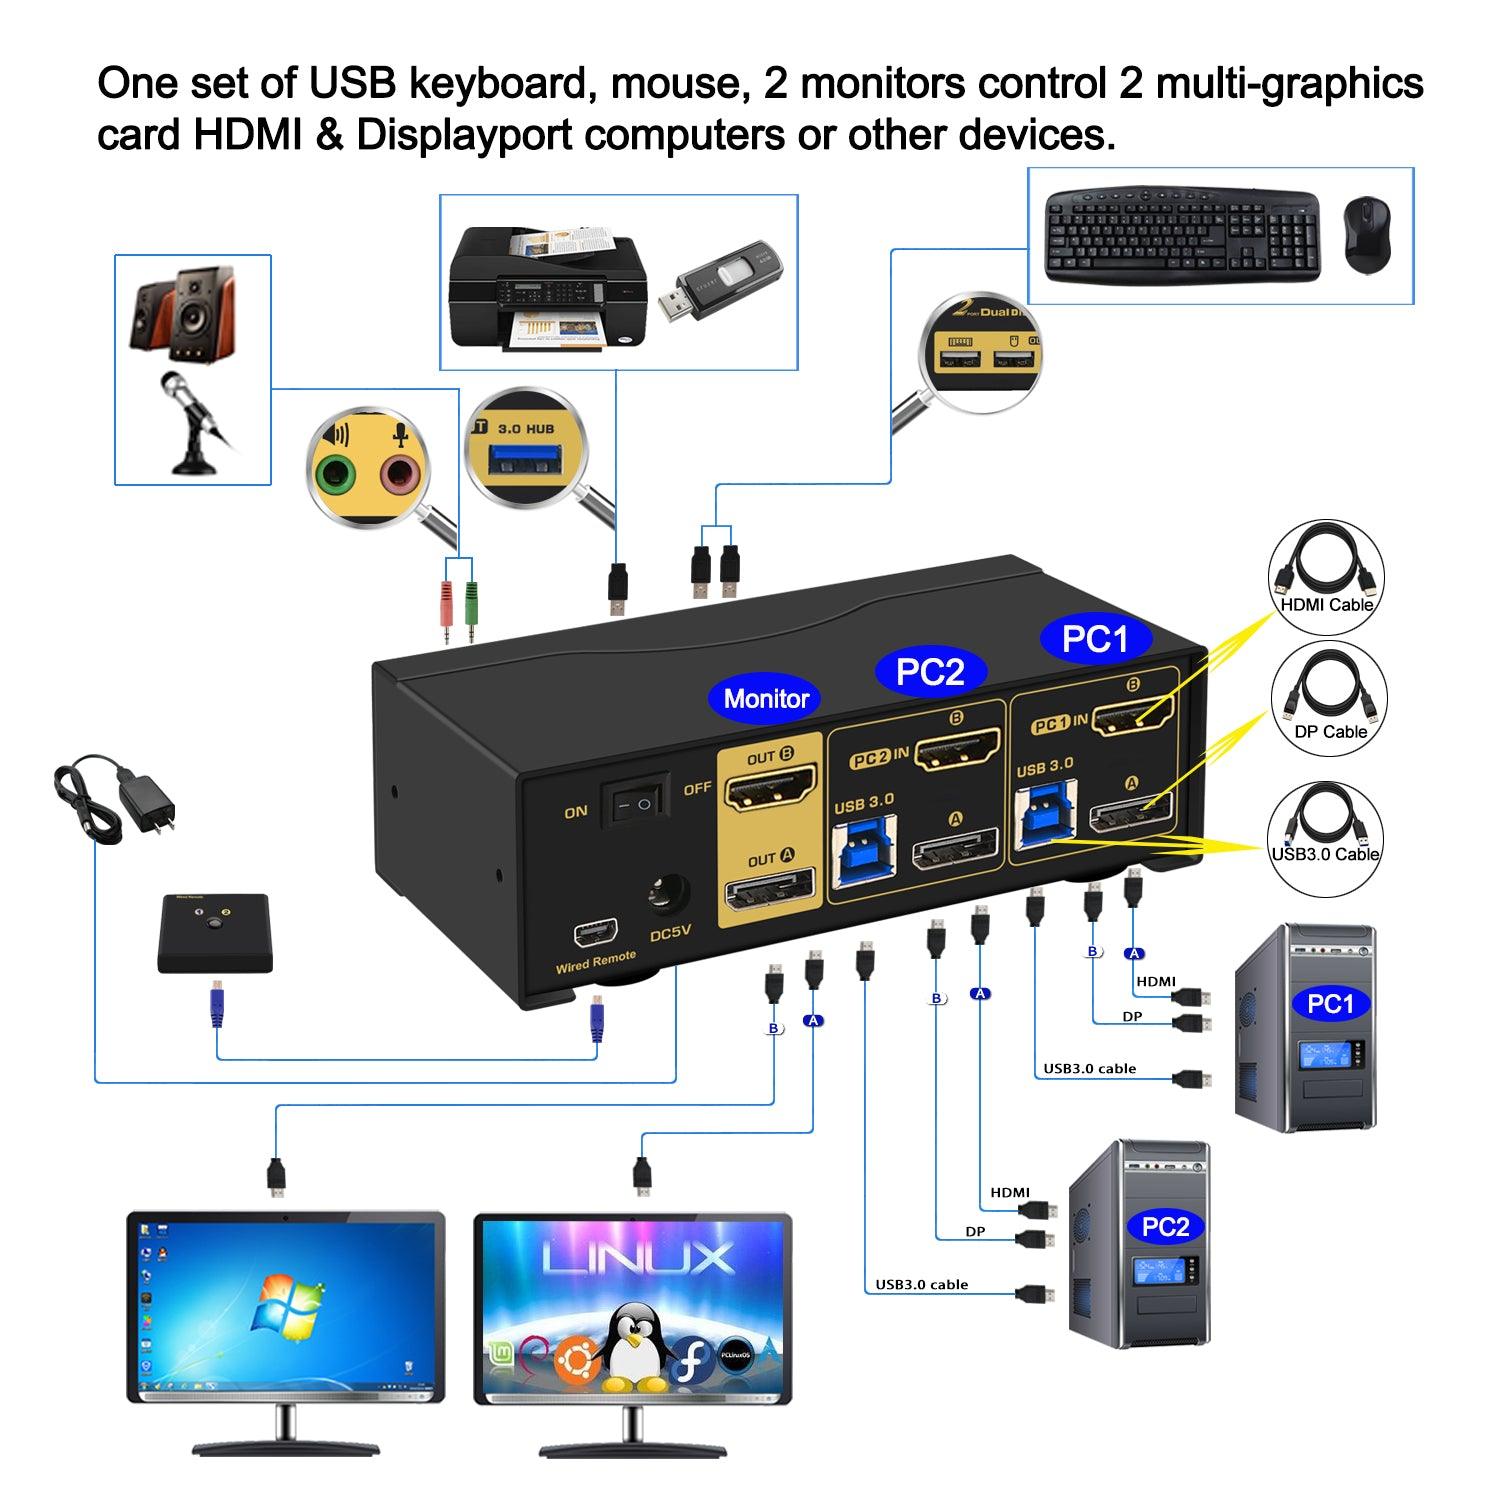 CKL 2 Port USB 3.0 KVM Switch Dual Monitor HDMI 2.0 4K@60Hz(HDMI Out) + DisplayPort 1.4 8K 30Hz 4K 120Hz 144Hz (DP Out), Keyboard Video Mouse Peripherals Switcher for 2 Computers 2 Monitors with Audio (622DH-4) - CKL KVM Switches